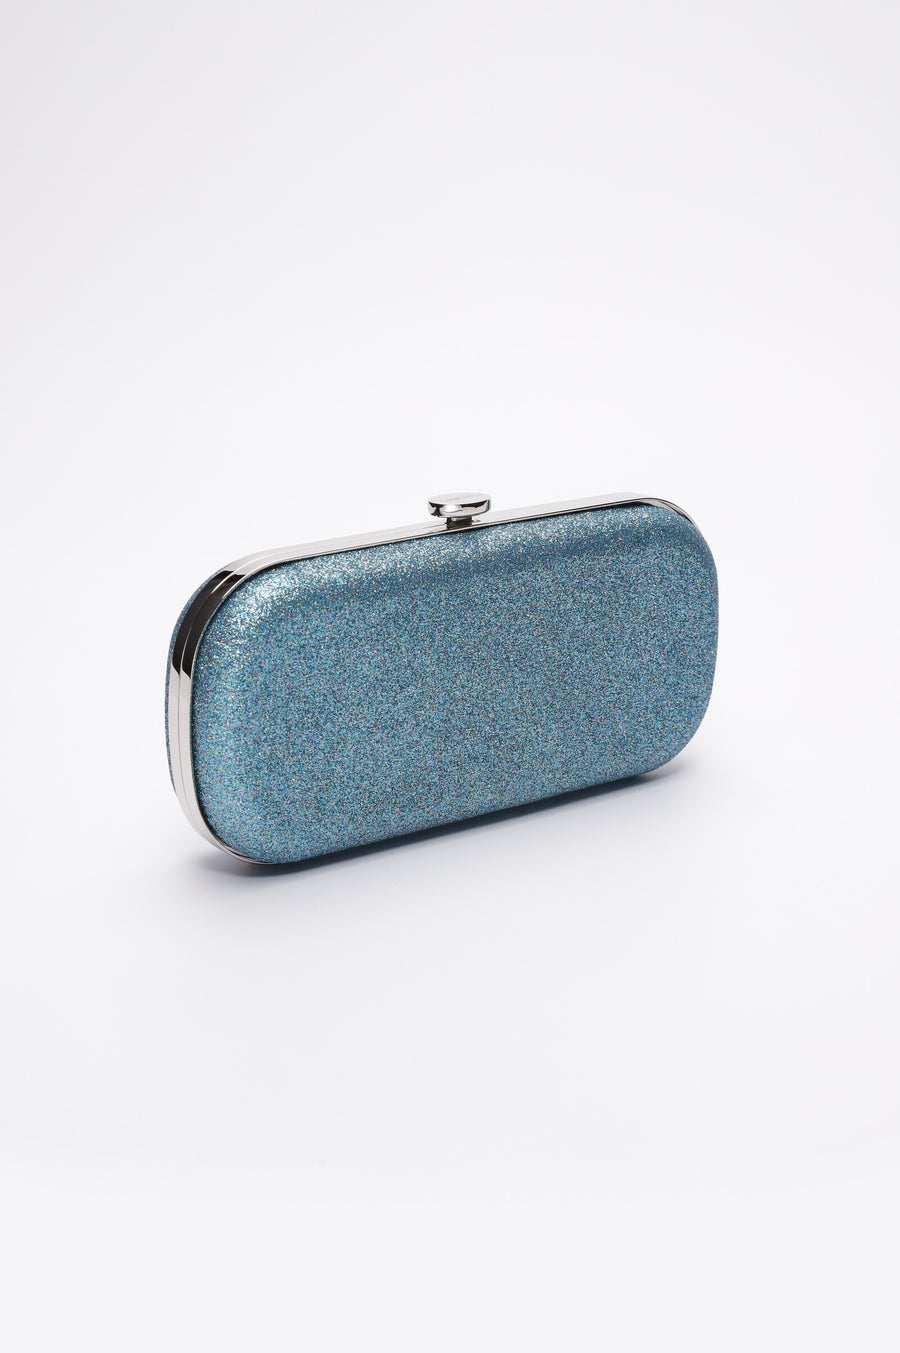 Side view of Shimmer Bella Clutch in Ocean Blue with silver clasp.